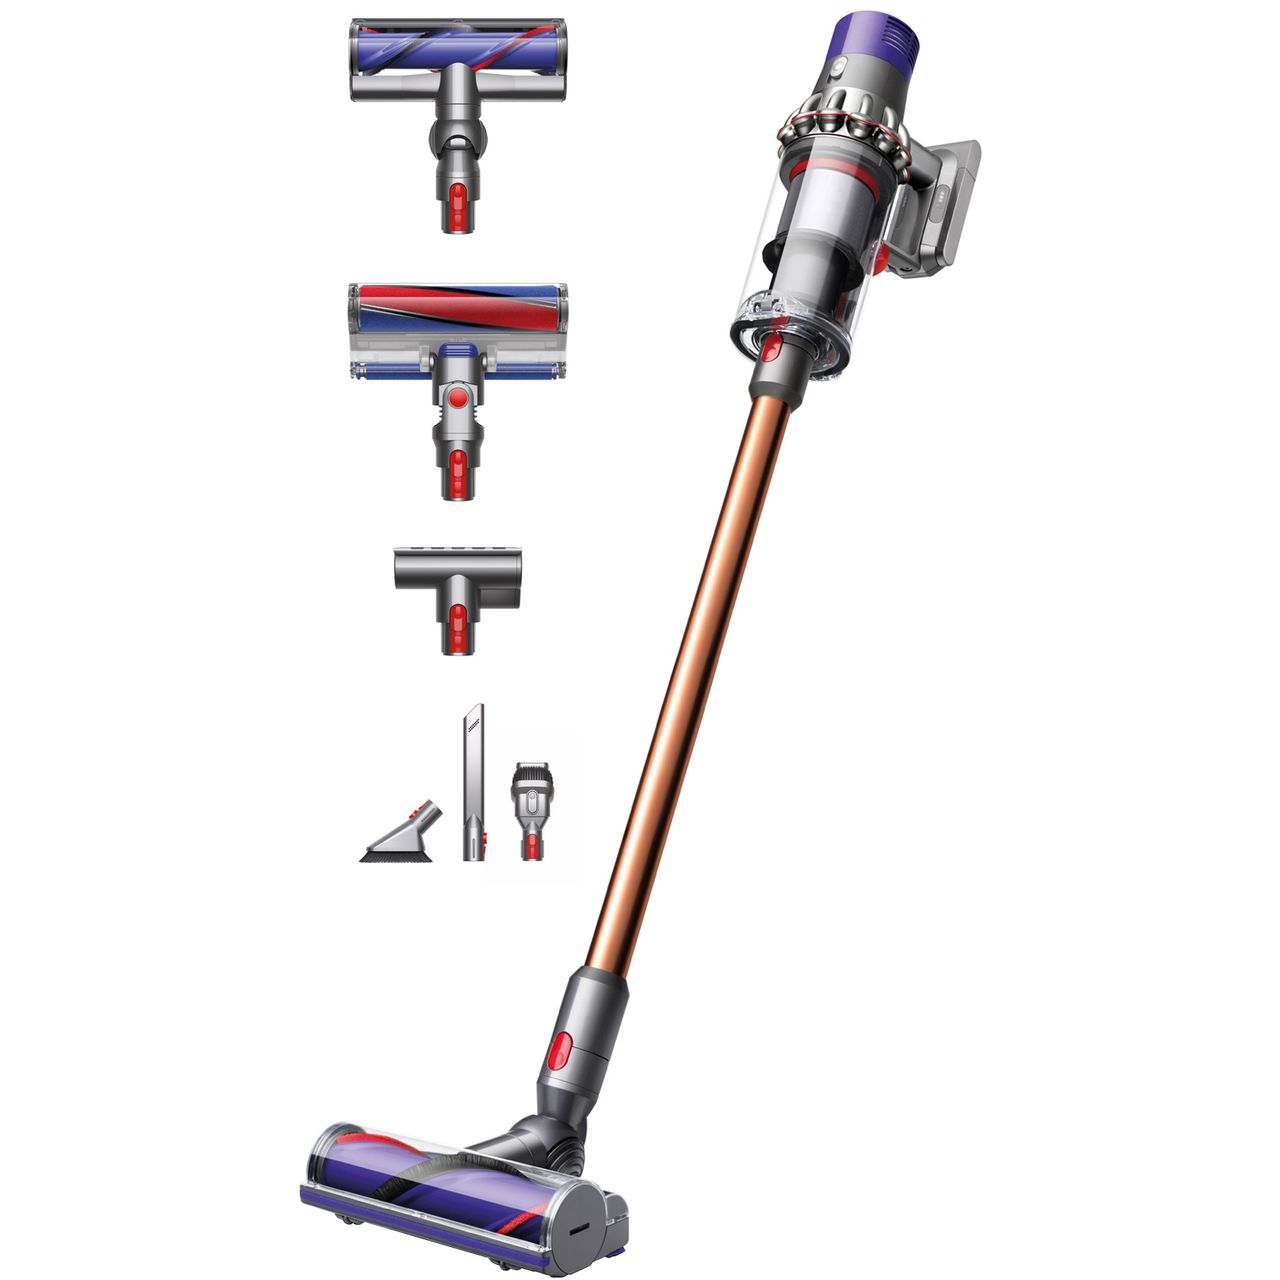 Dyson Cyclone V10 Absolute Cordless Vacuum Cleaner with up to 60 Minutes Run Time Review